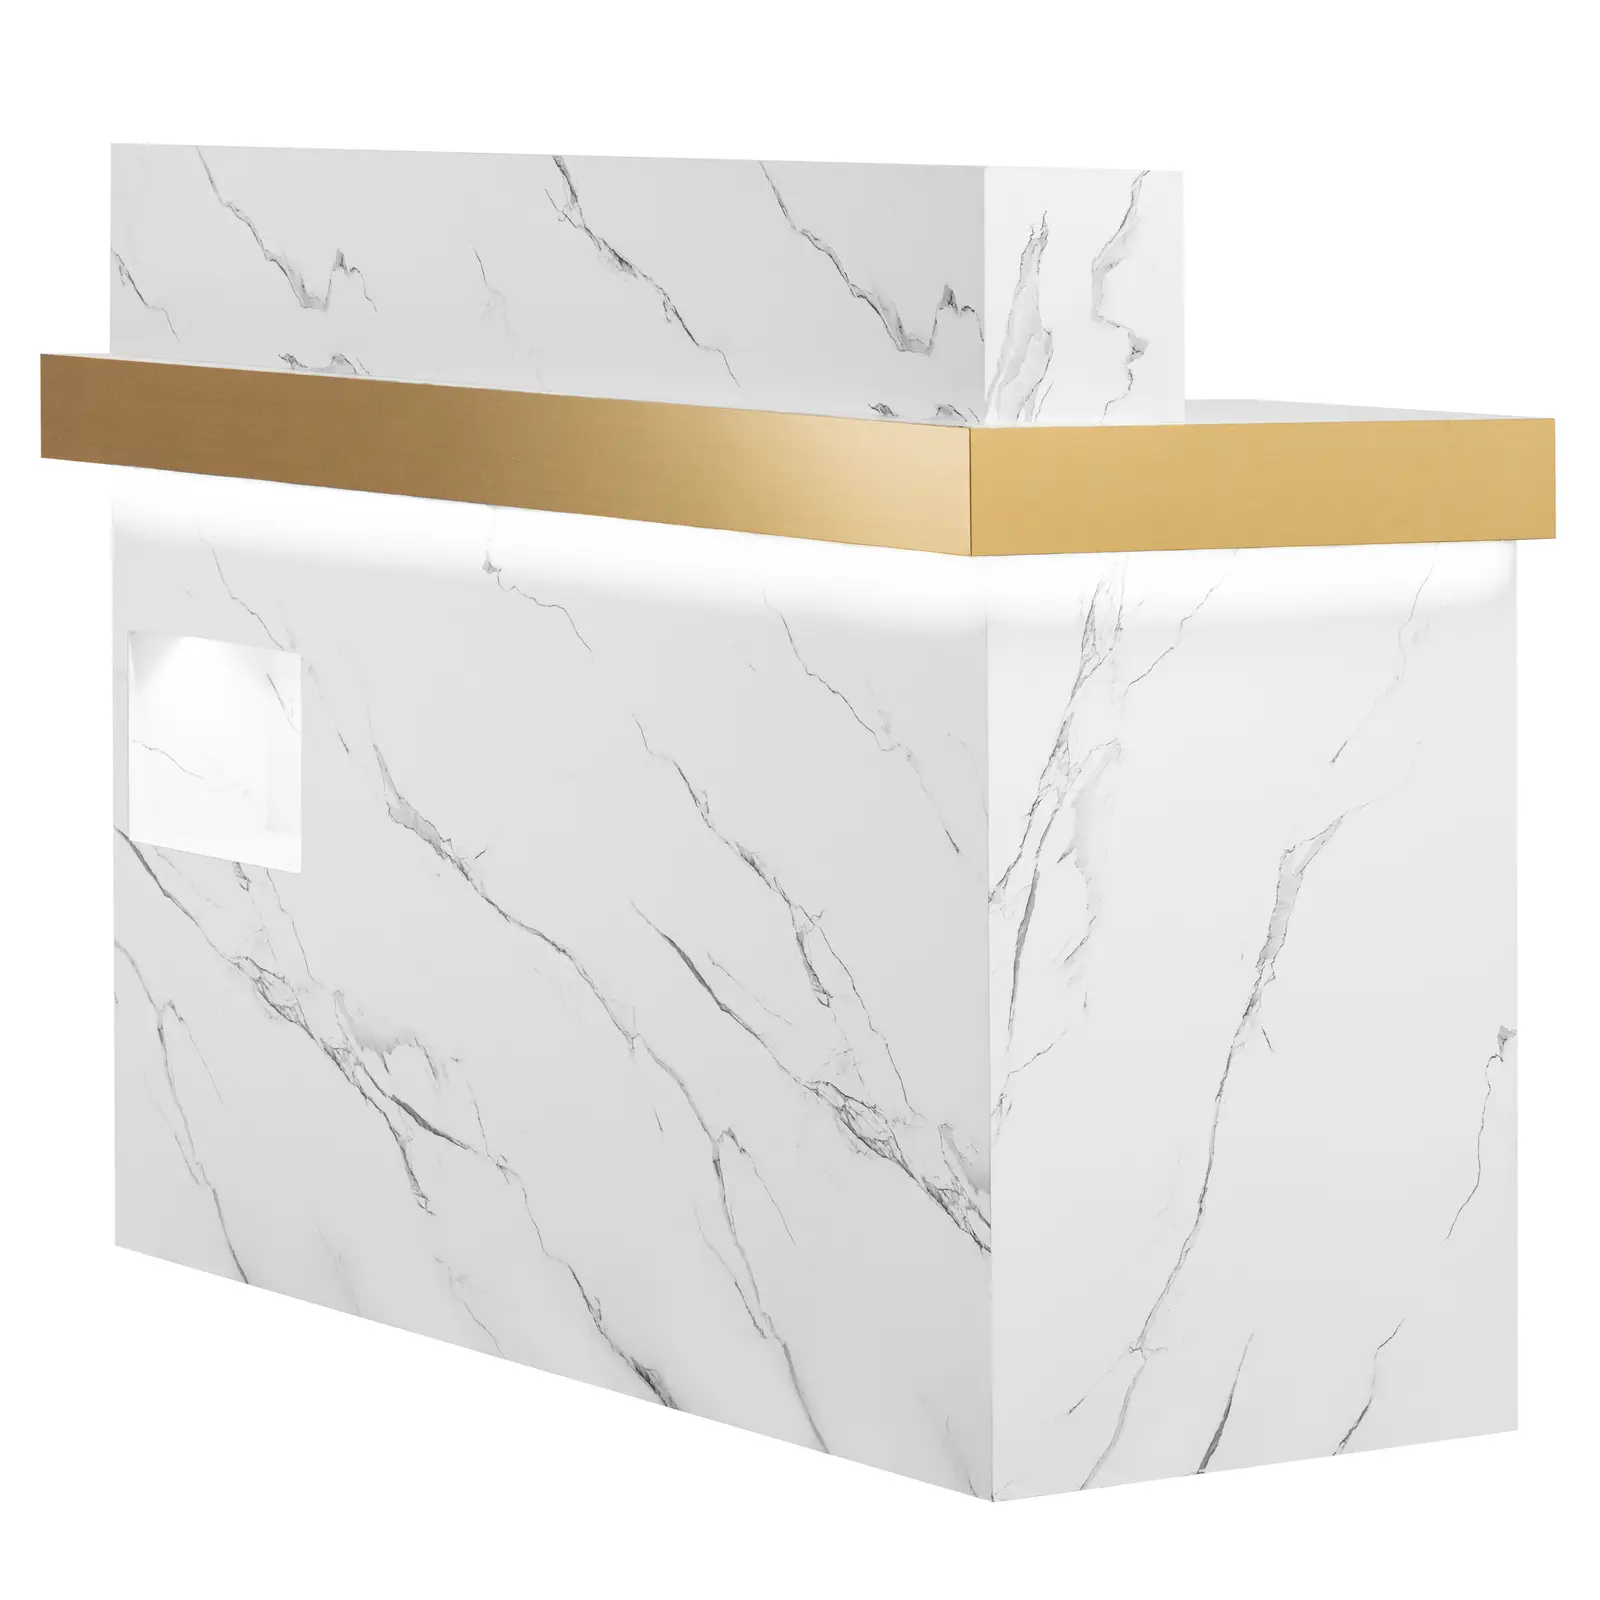 Reception Desk - with indirect lighting - lockable - pull-out keyboard shelf - marble look